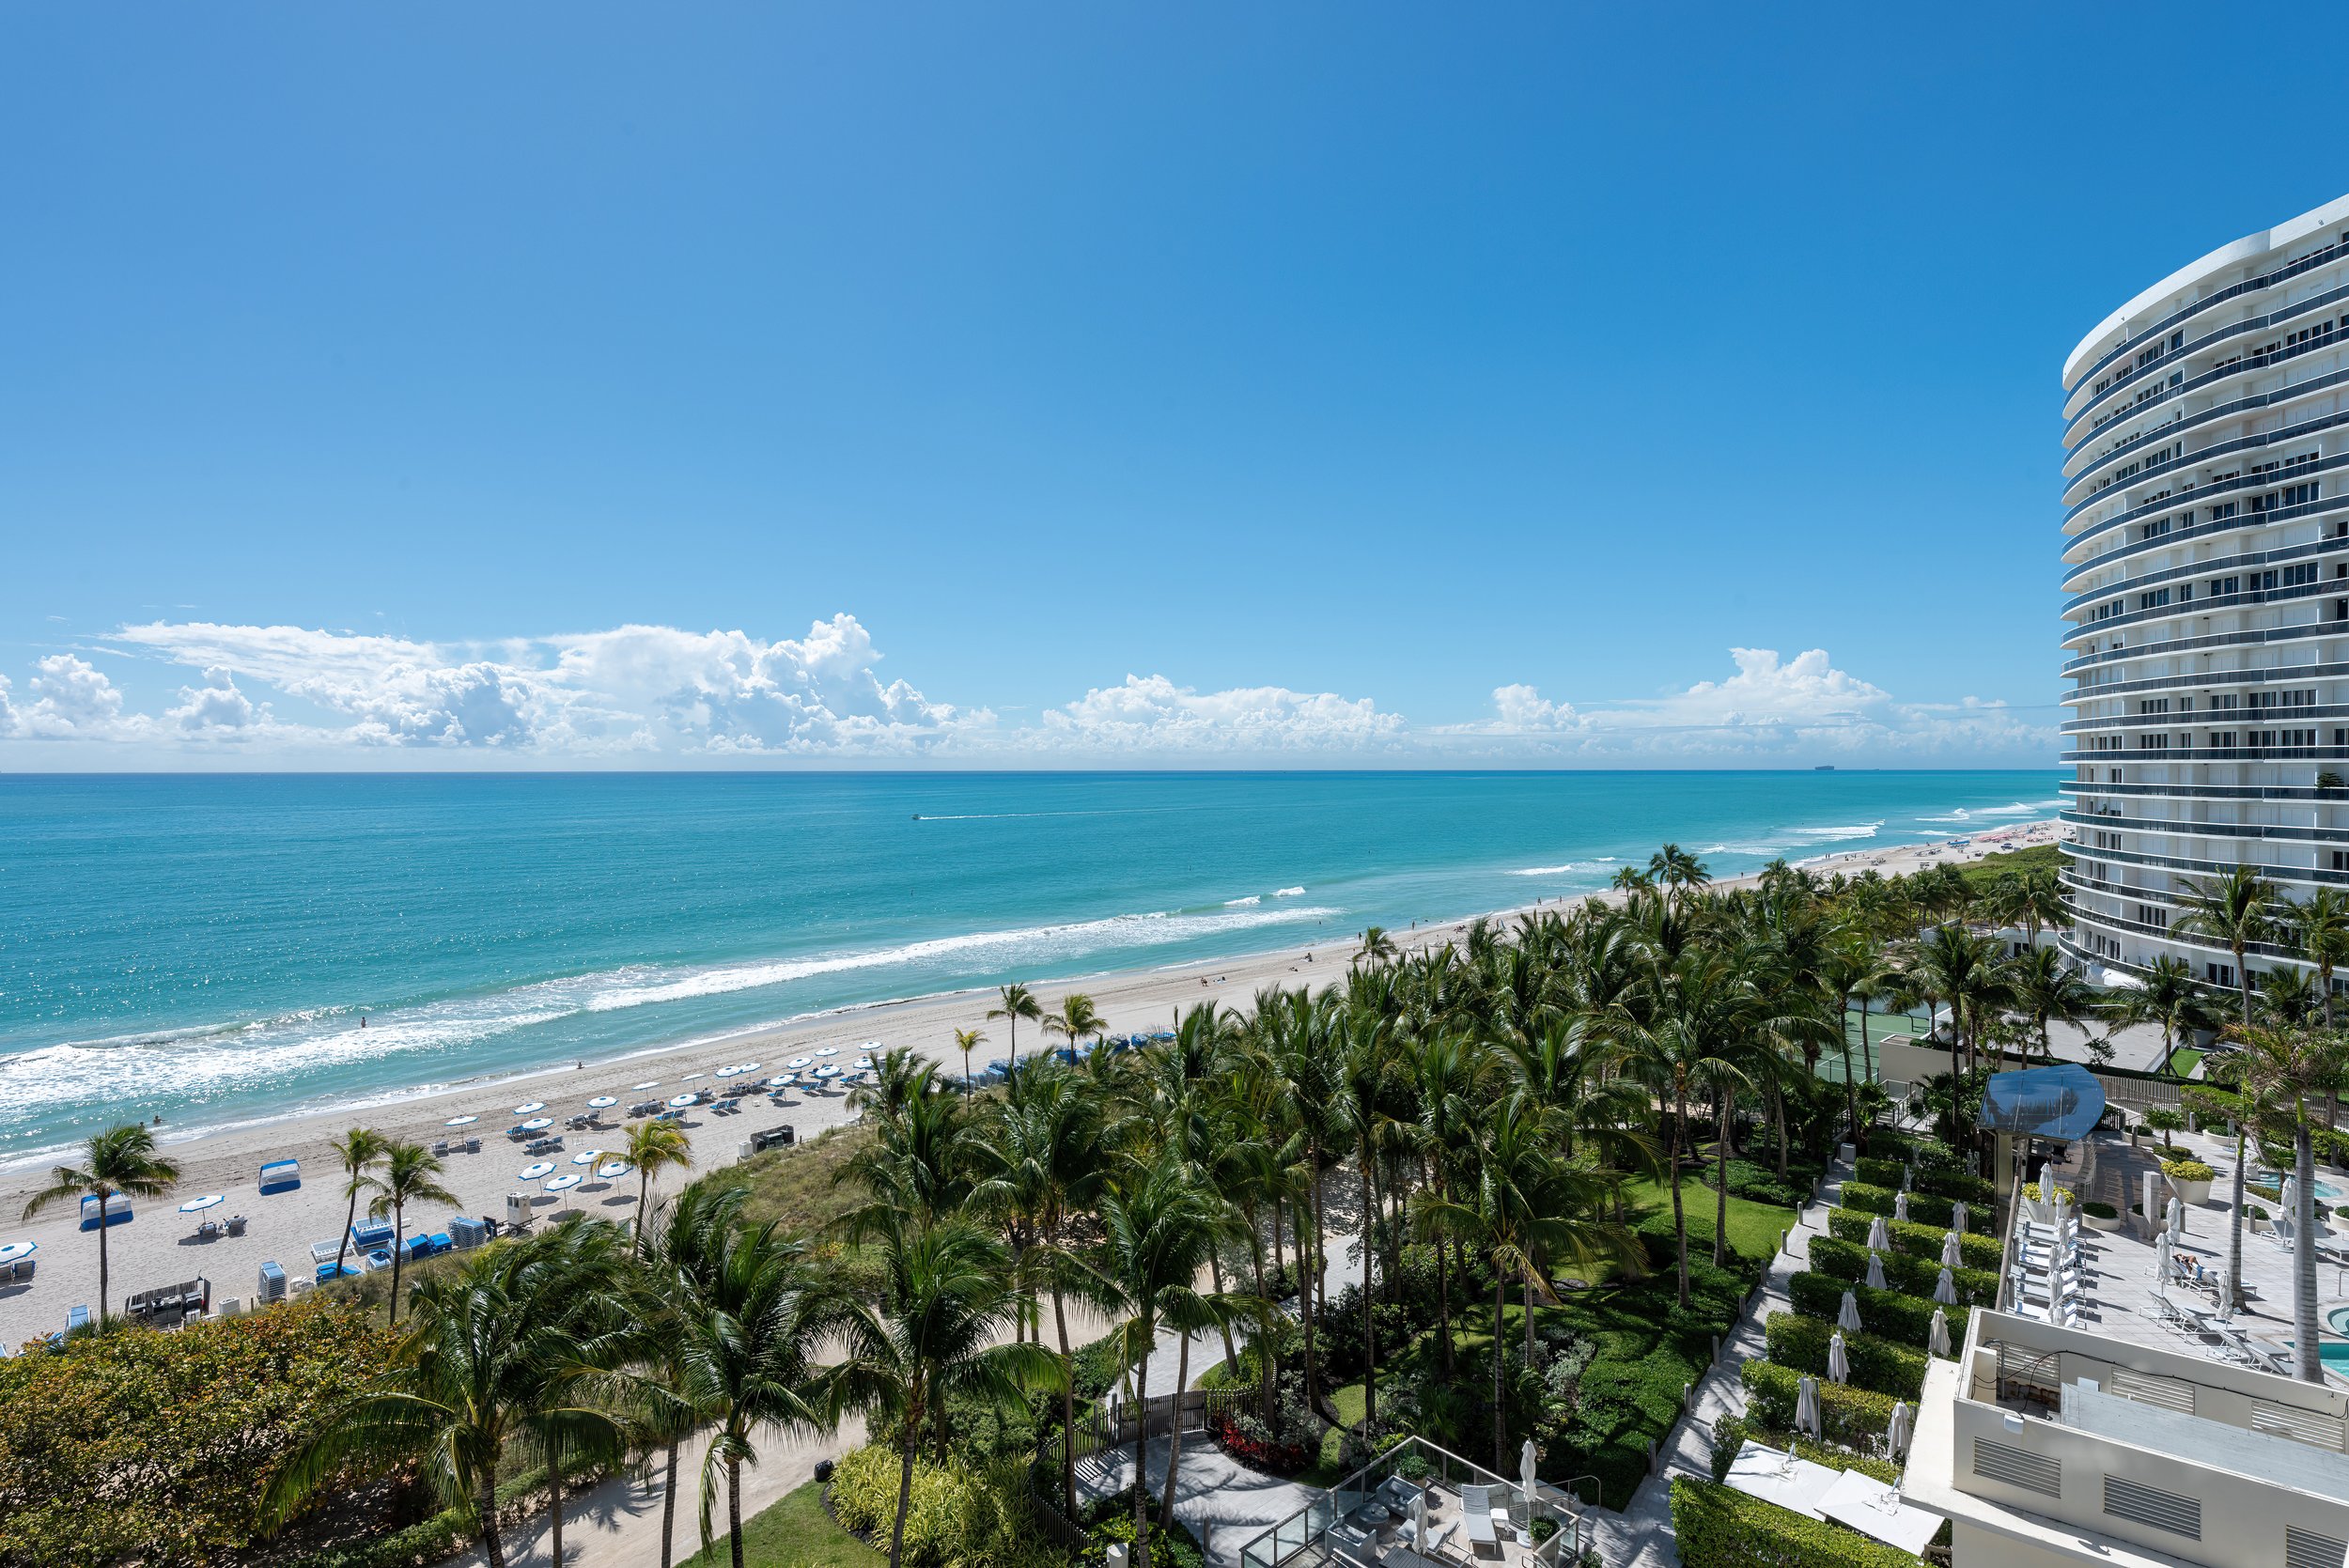 Master Brokers Forum Listing: See The Views From This Beachfront Condo In St. Regis Bal Harbour Asking $10.995 Million 7.JPG